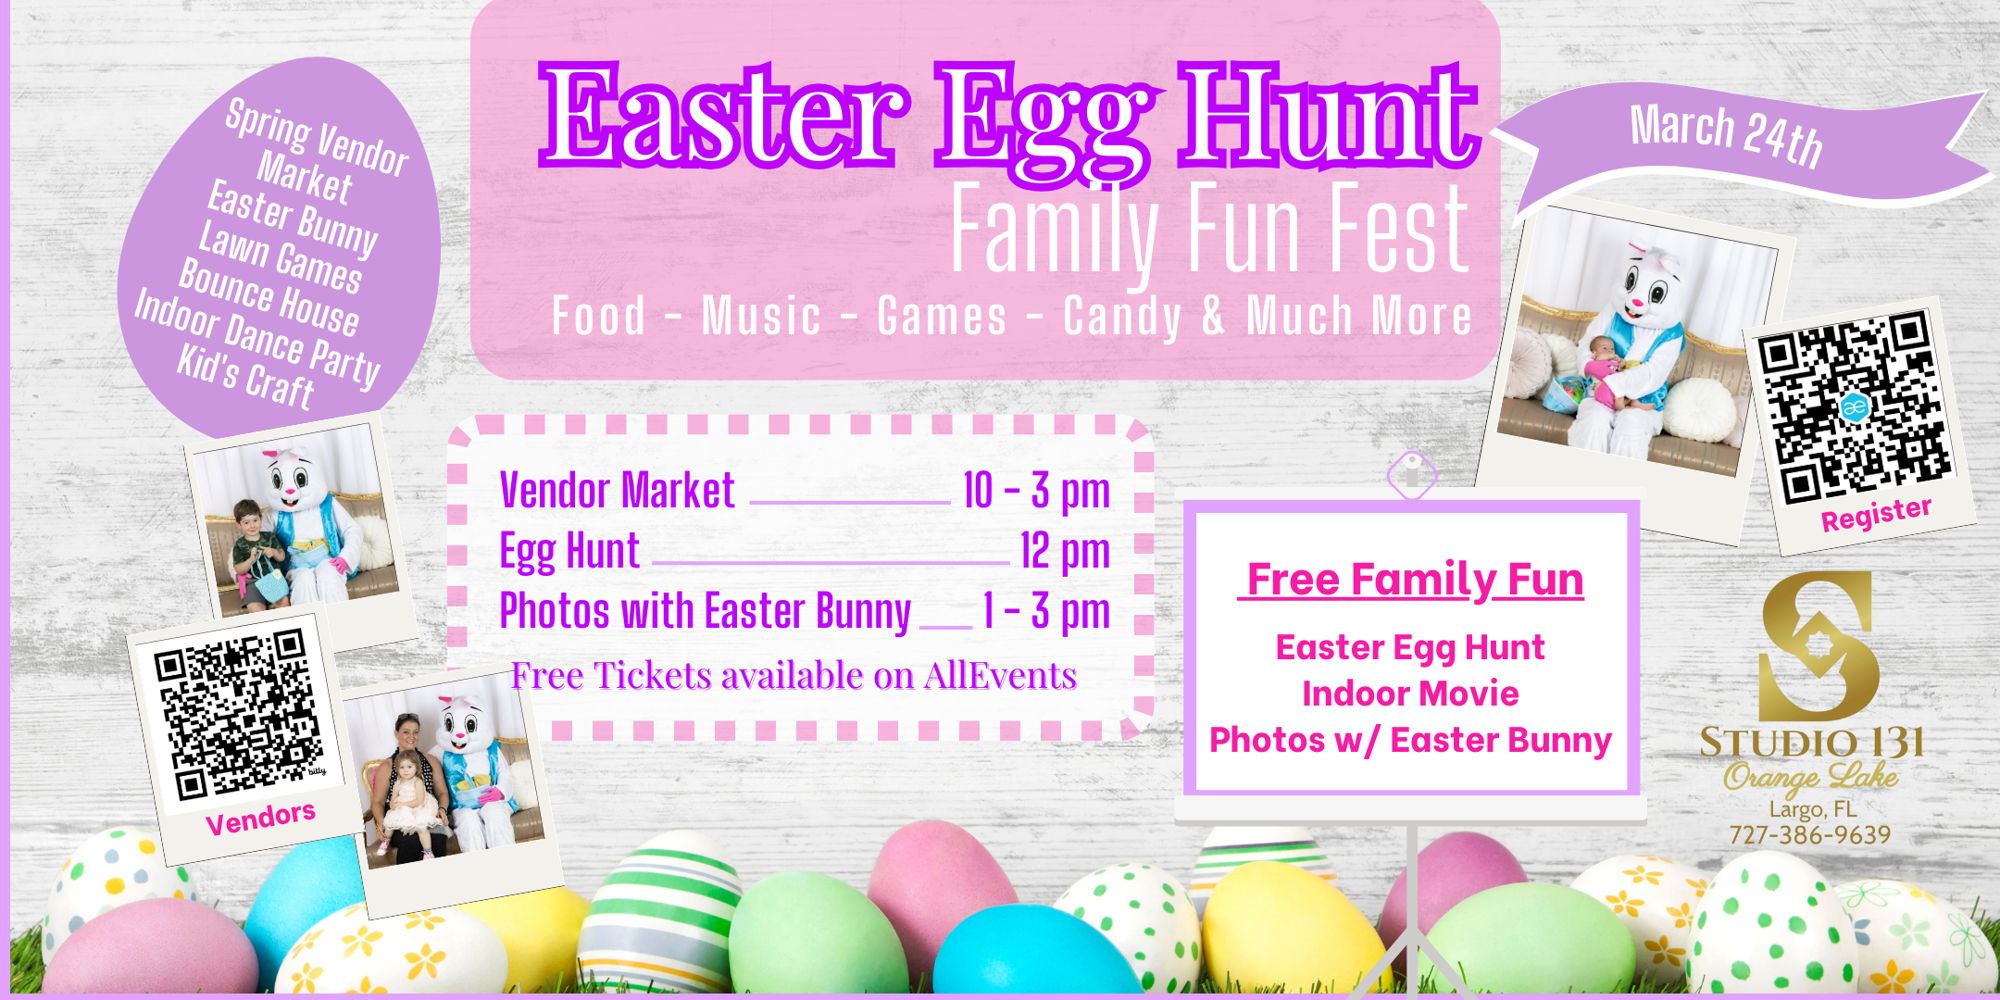 Easter Egg Hunt and Family Fun Fest promotional image